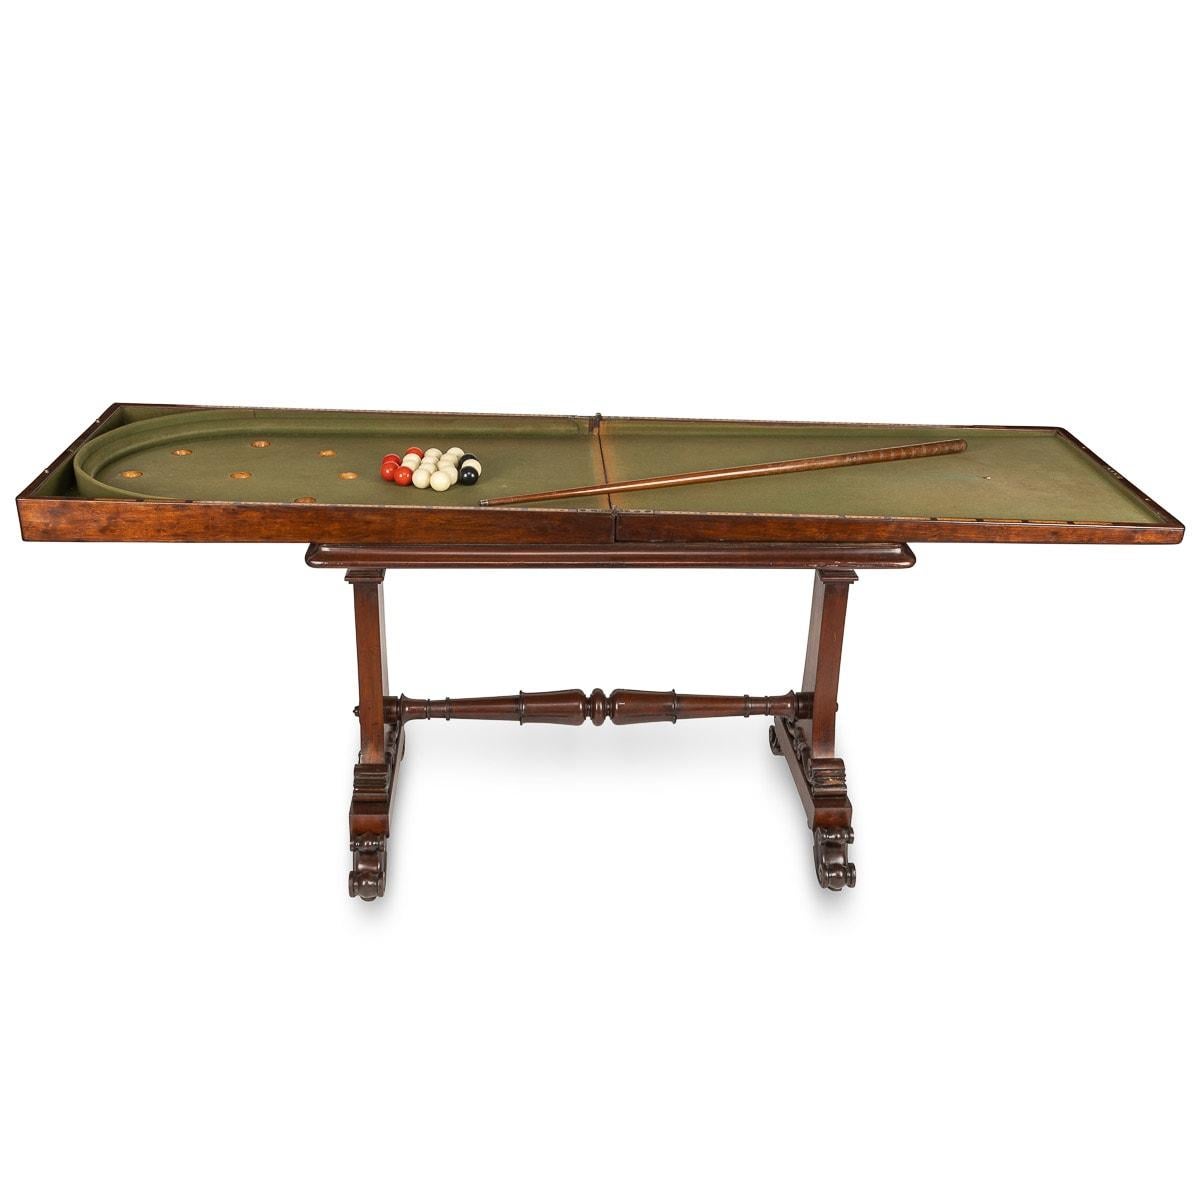 Antique early 20th Century Victorian mahogany bagatelle folding table game, with 18 original balls, cue and rule book. This table is supported by a beautifully carved wooden base, with a turned wooden support beams. The tabletop folds in half